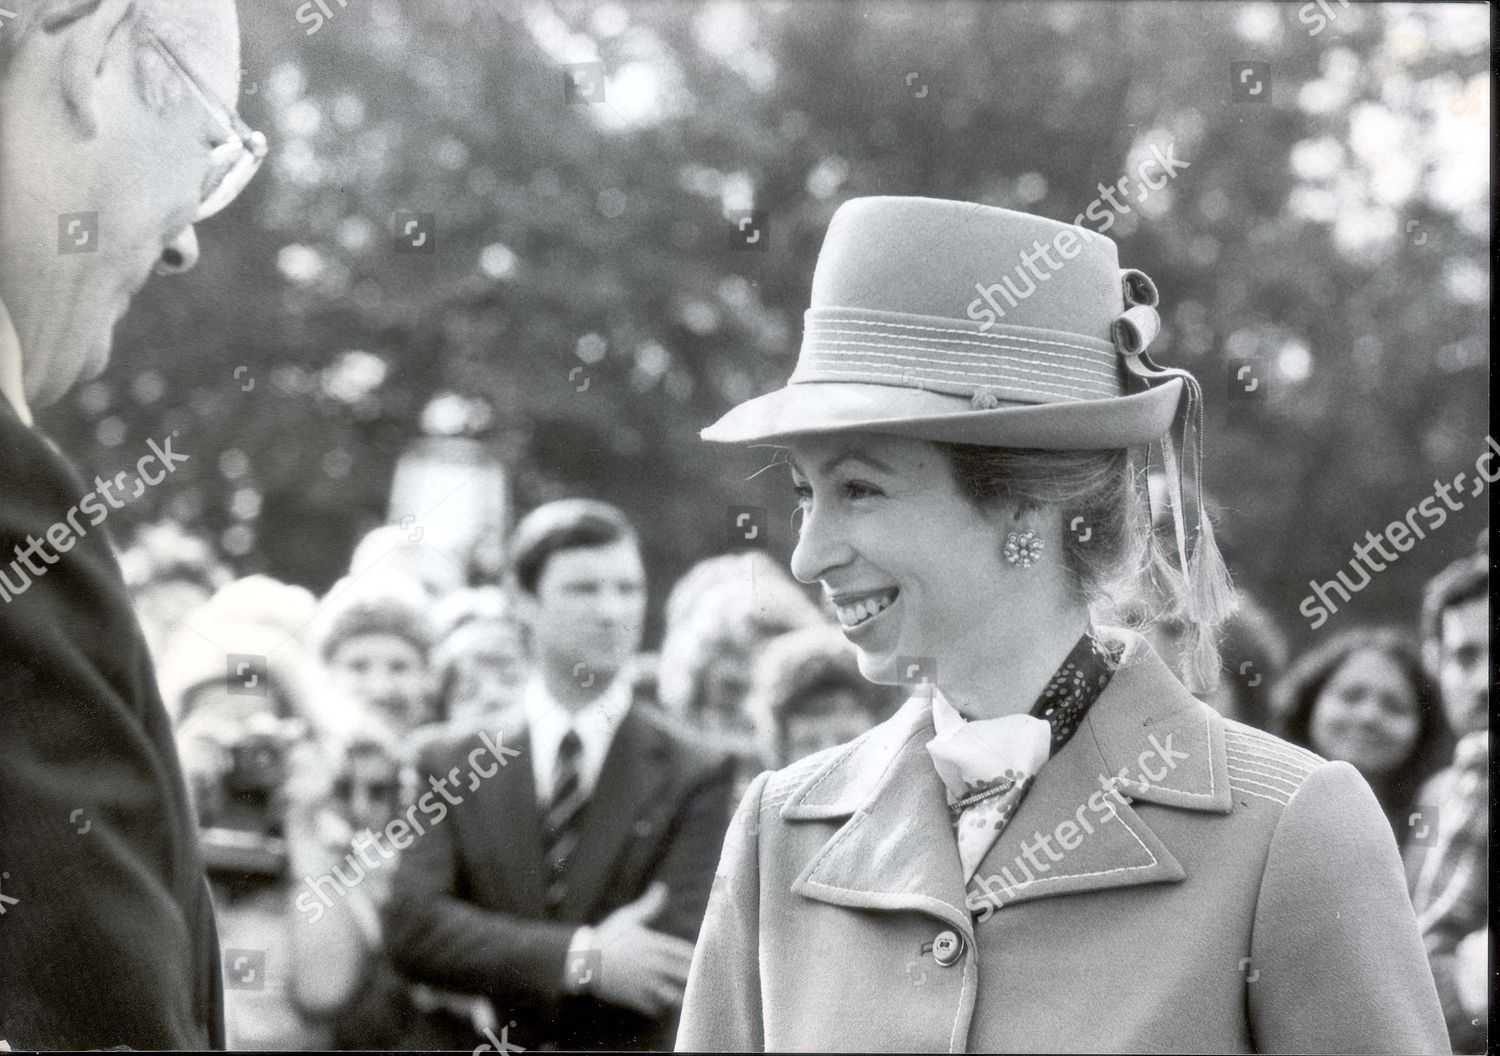 princess-anne-now-princess-royal-october-1978-princess-anne-at-the-hoover-factory-in-west-london-today-royalty-shutterstock-editorial-890881a.jpg